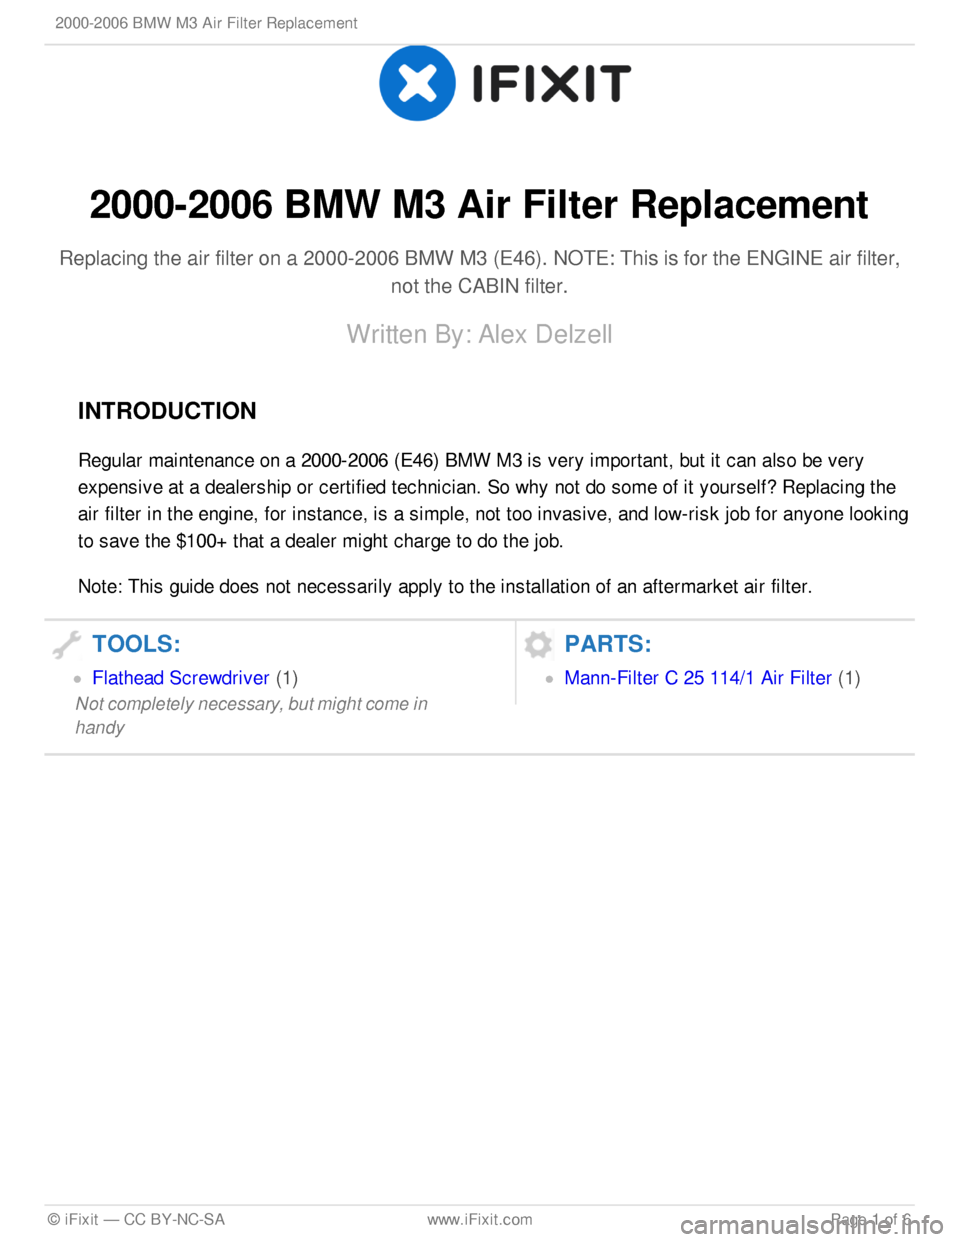 BMW M3 COUPE 2005 E46 Air Filter Replacement 2000-2 006 B M W  M 3 A ir  F ilt e r R ep la cem en t
Repla cin g th e a ir  filt e r o n a  2 000-2 006 B M W  M 3 ( E 46). N O TE : T his  is  fo r th e E N G IN E a ir  filt e r,
not th e C ABIN  